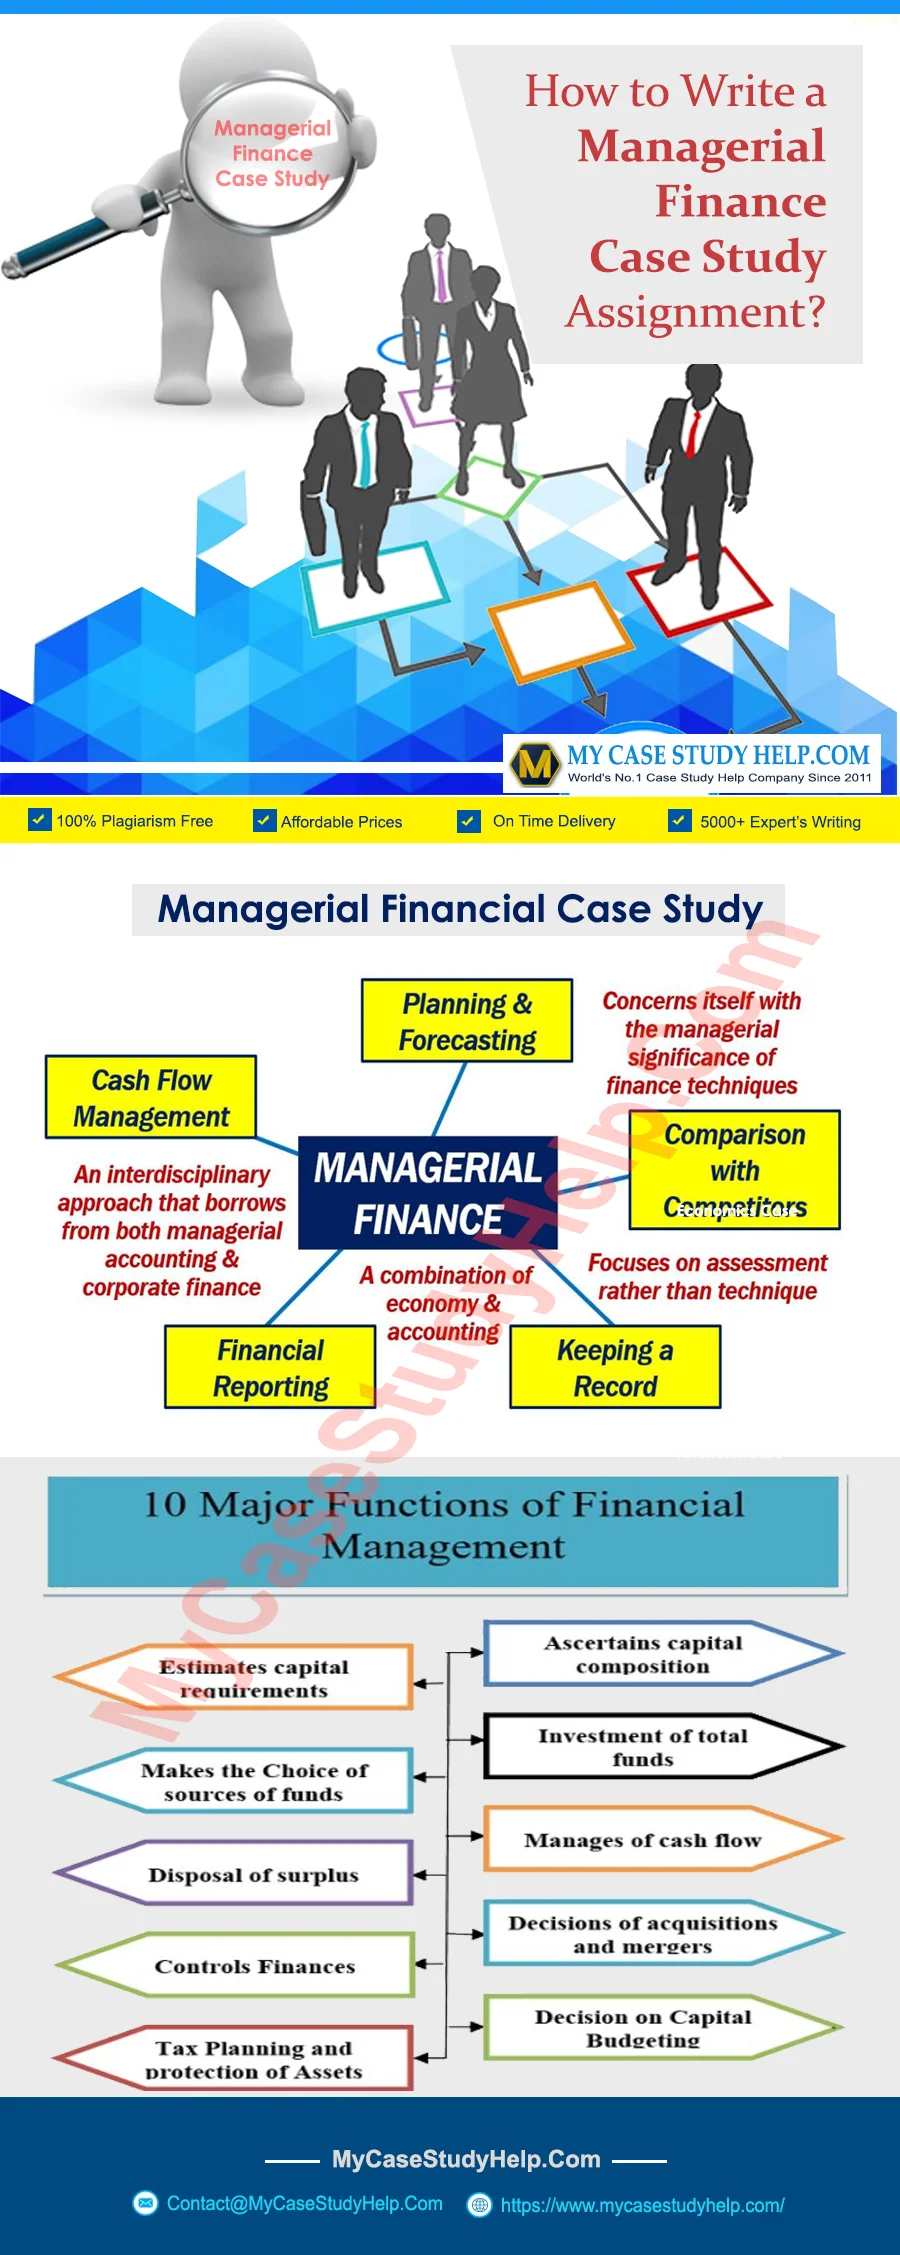 How To Write A Managerial Finance Case Study Assignment?